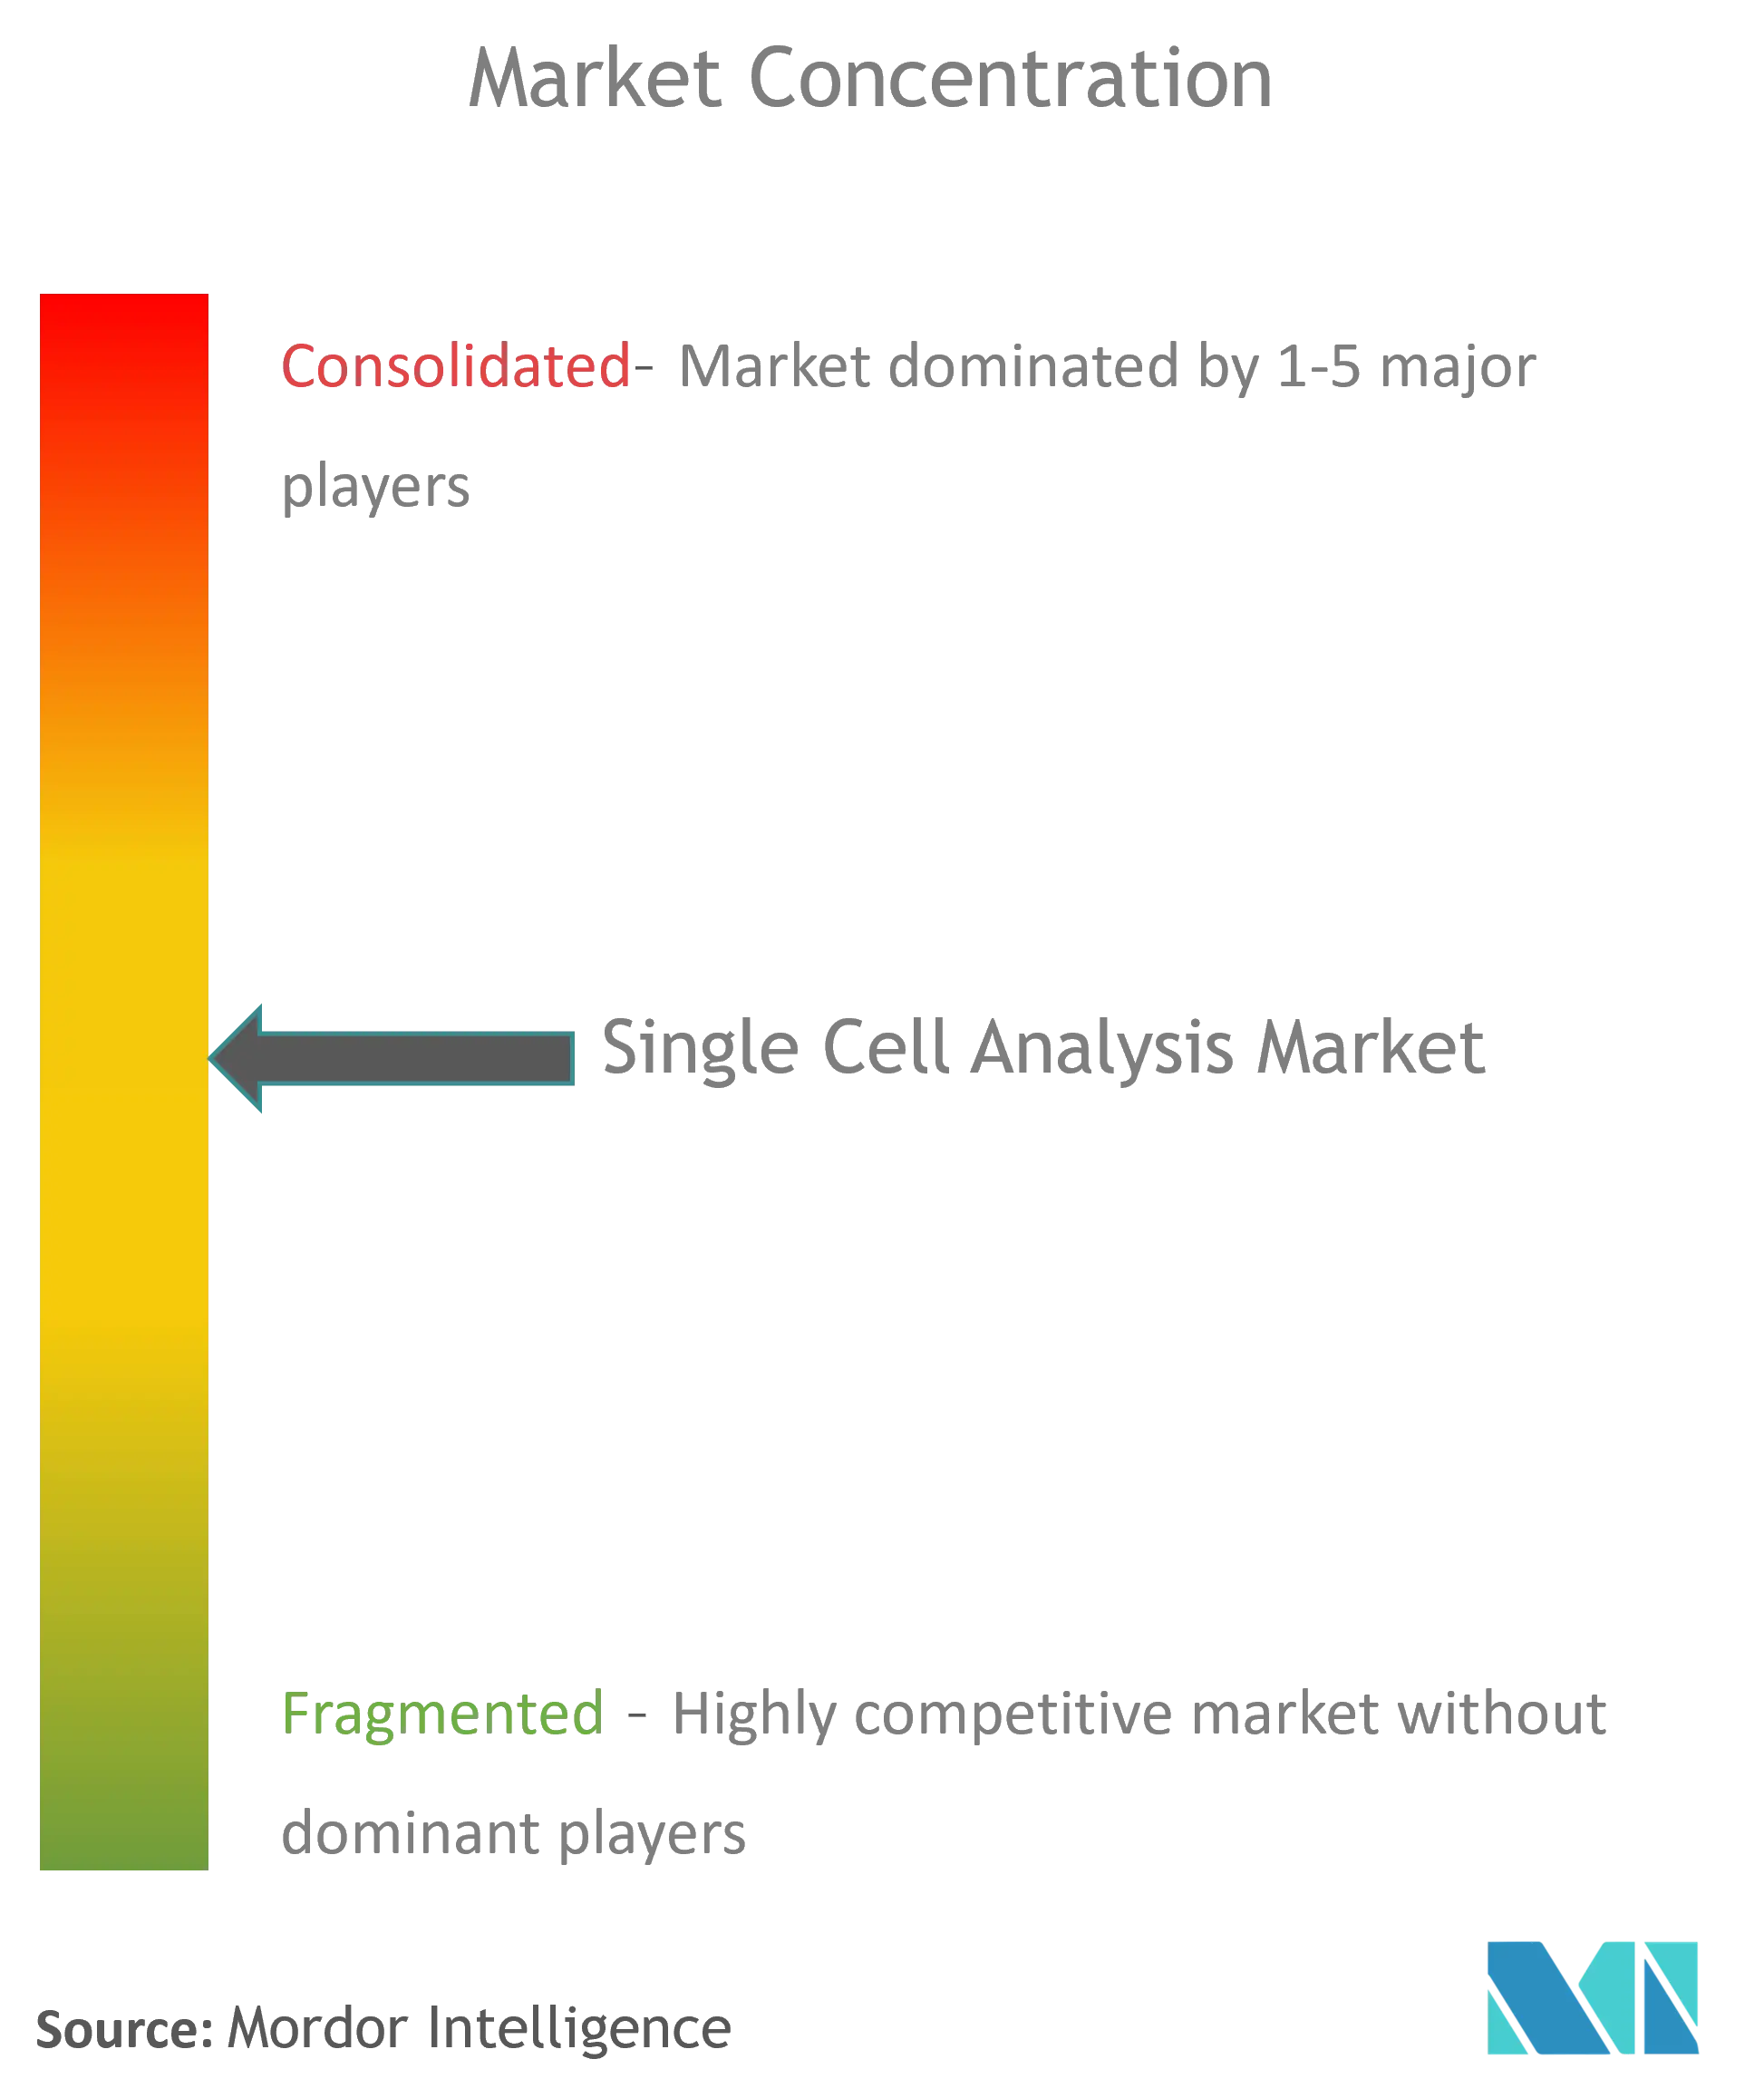 Single Cell Analysis Market Concentration